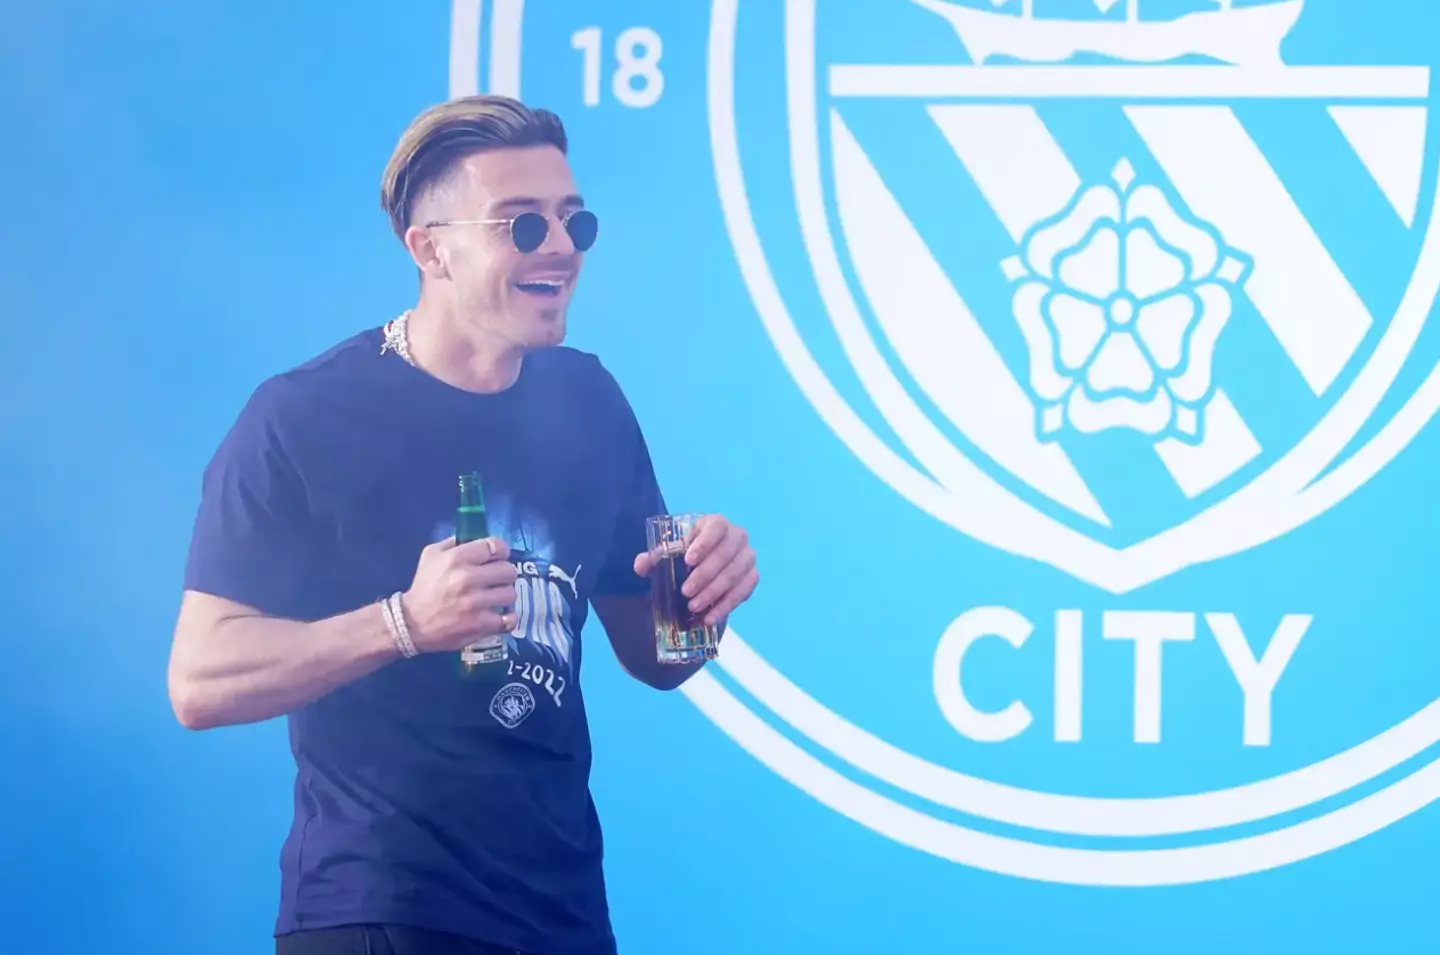 The Manchester City star is no stranger to having a good time.